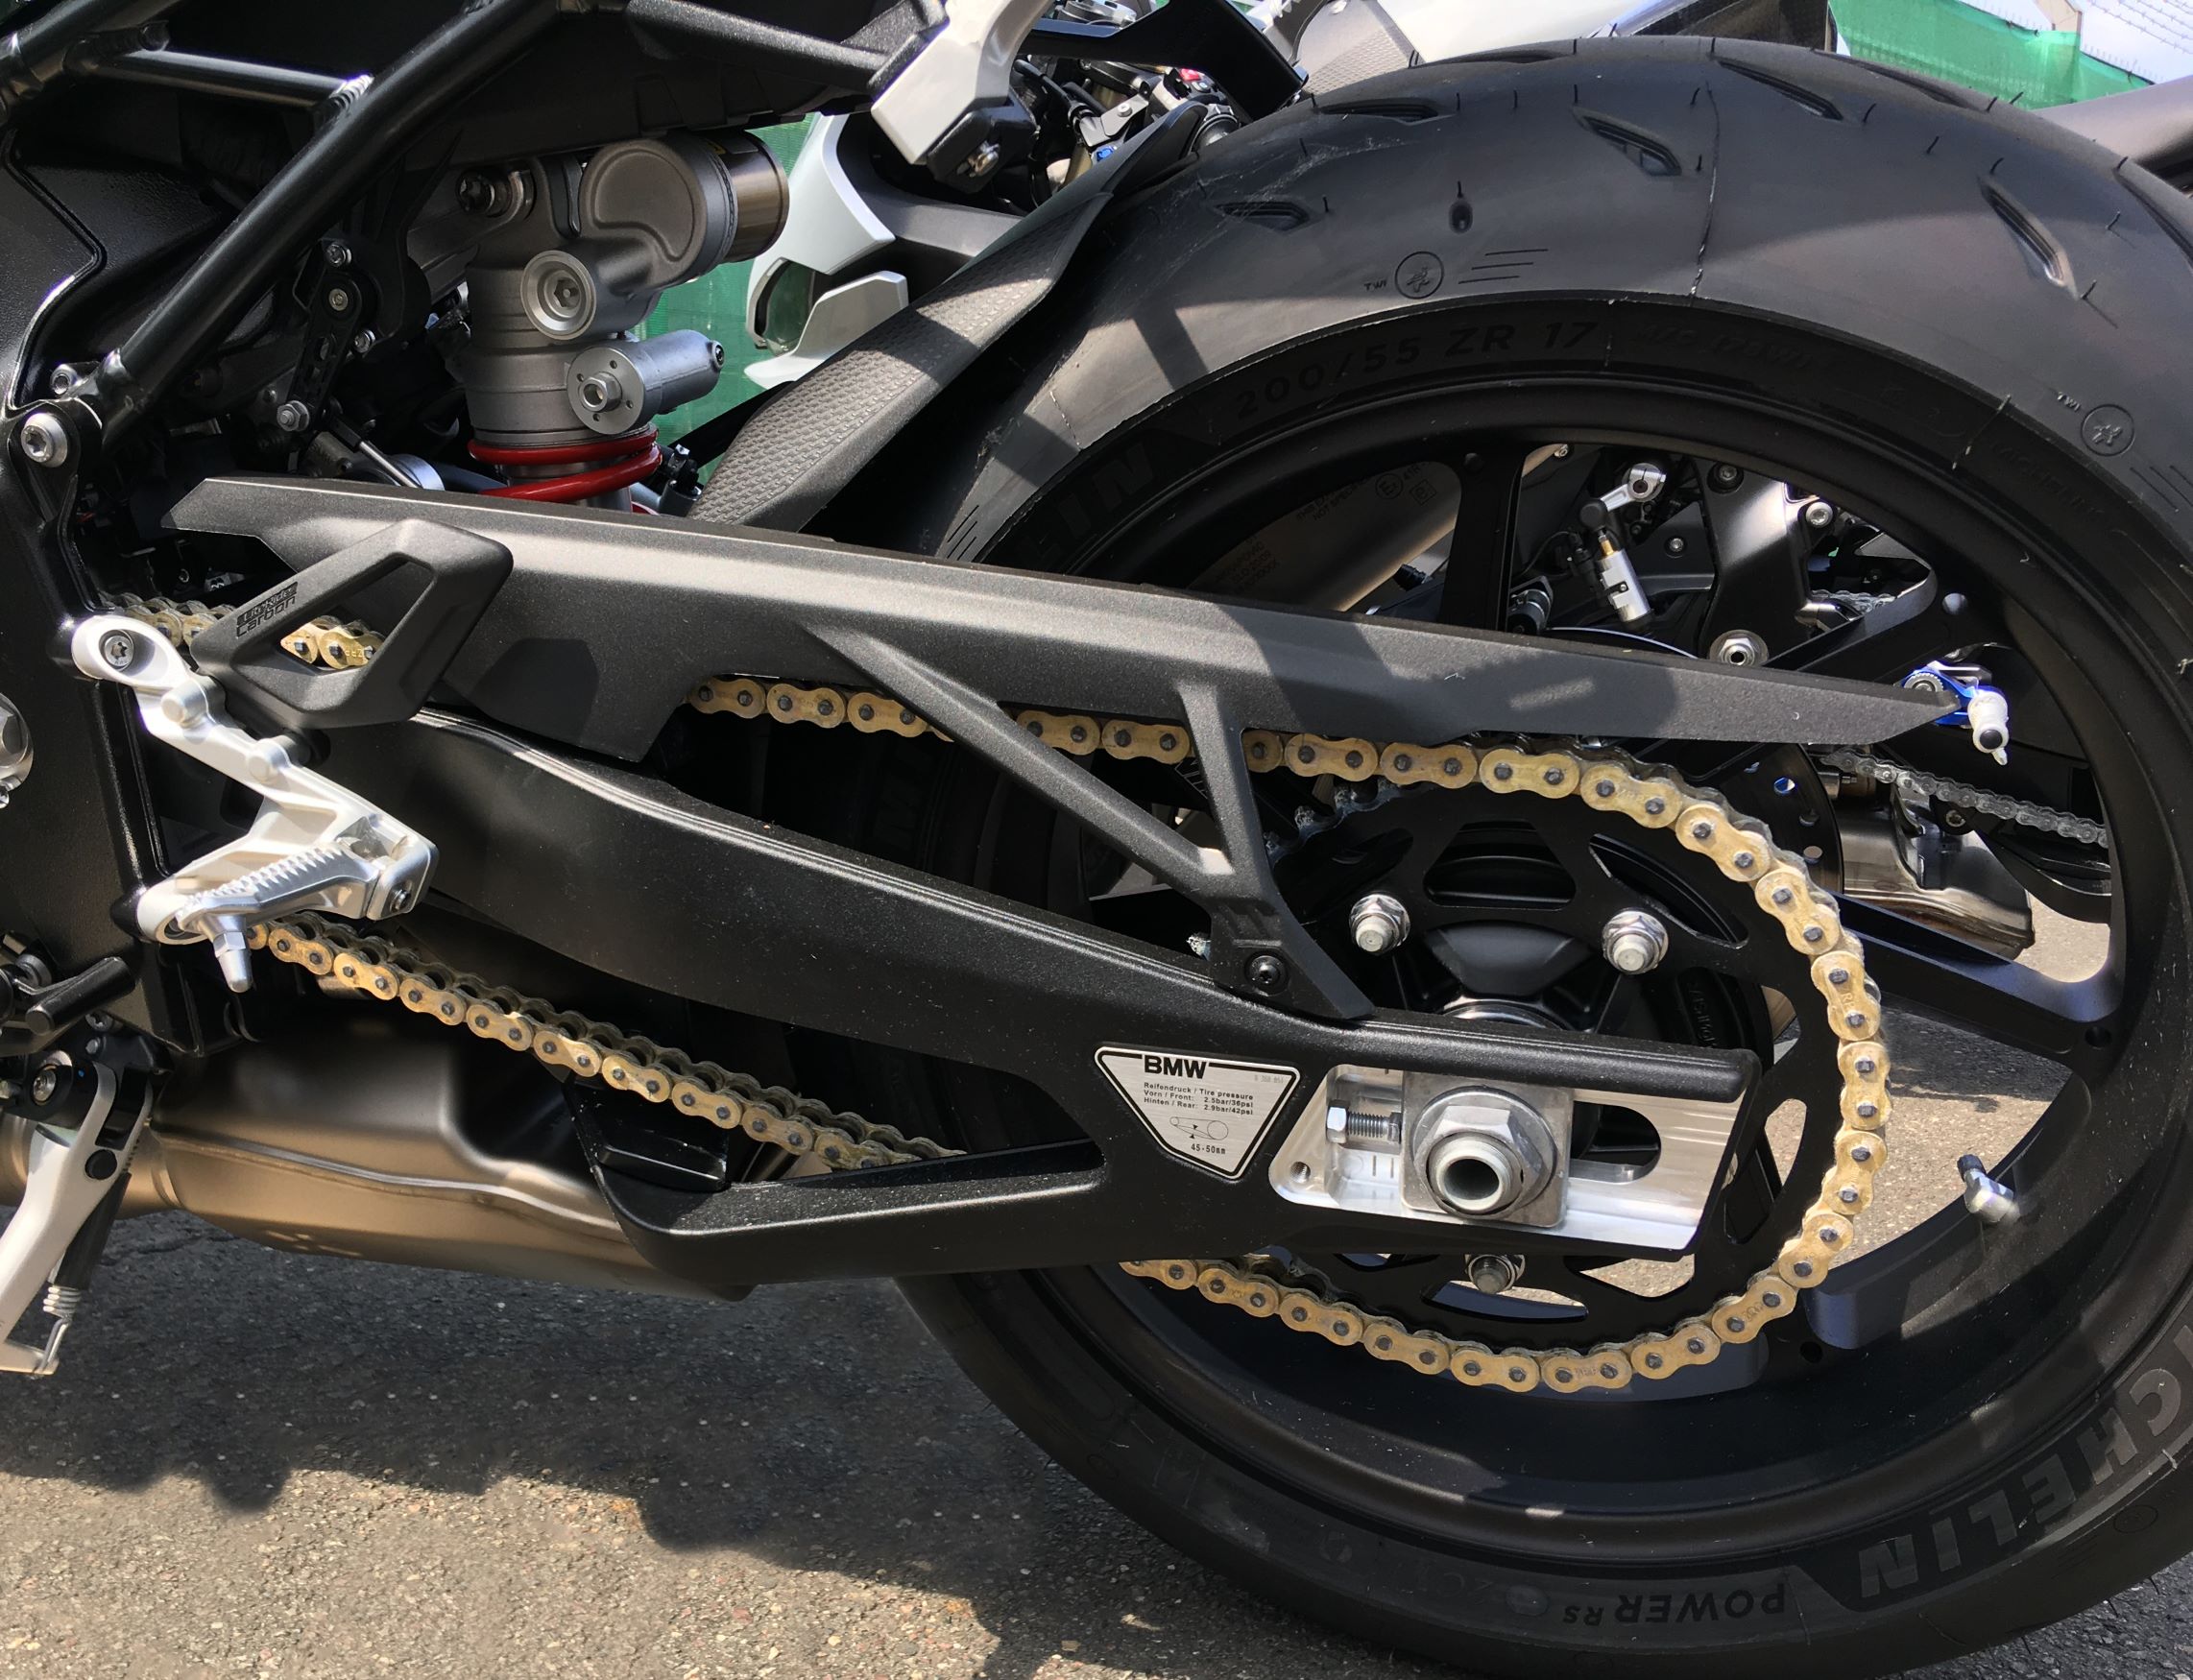 BMW S 1000 RR with the M Endurance motorcycle chain